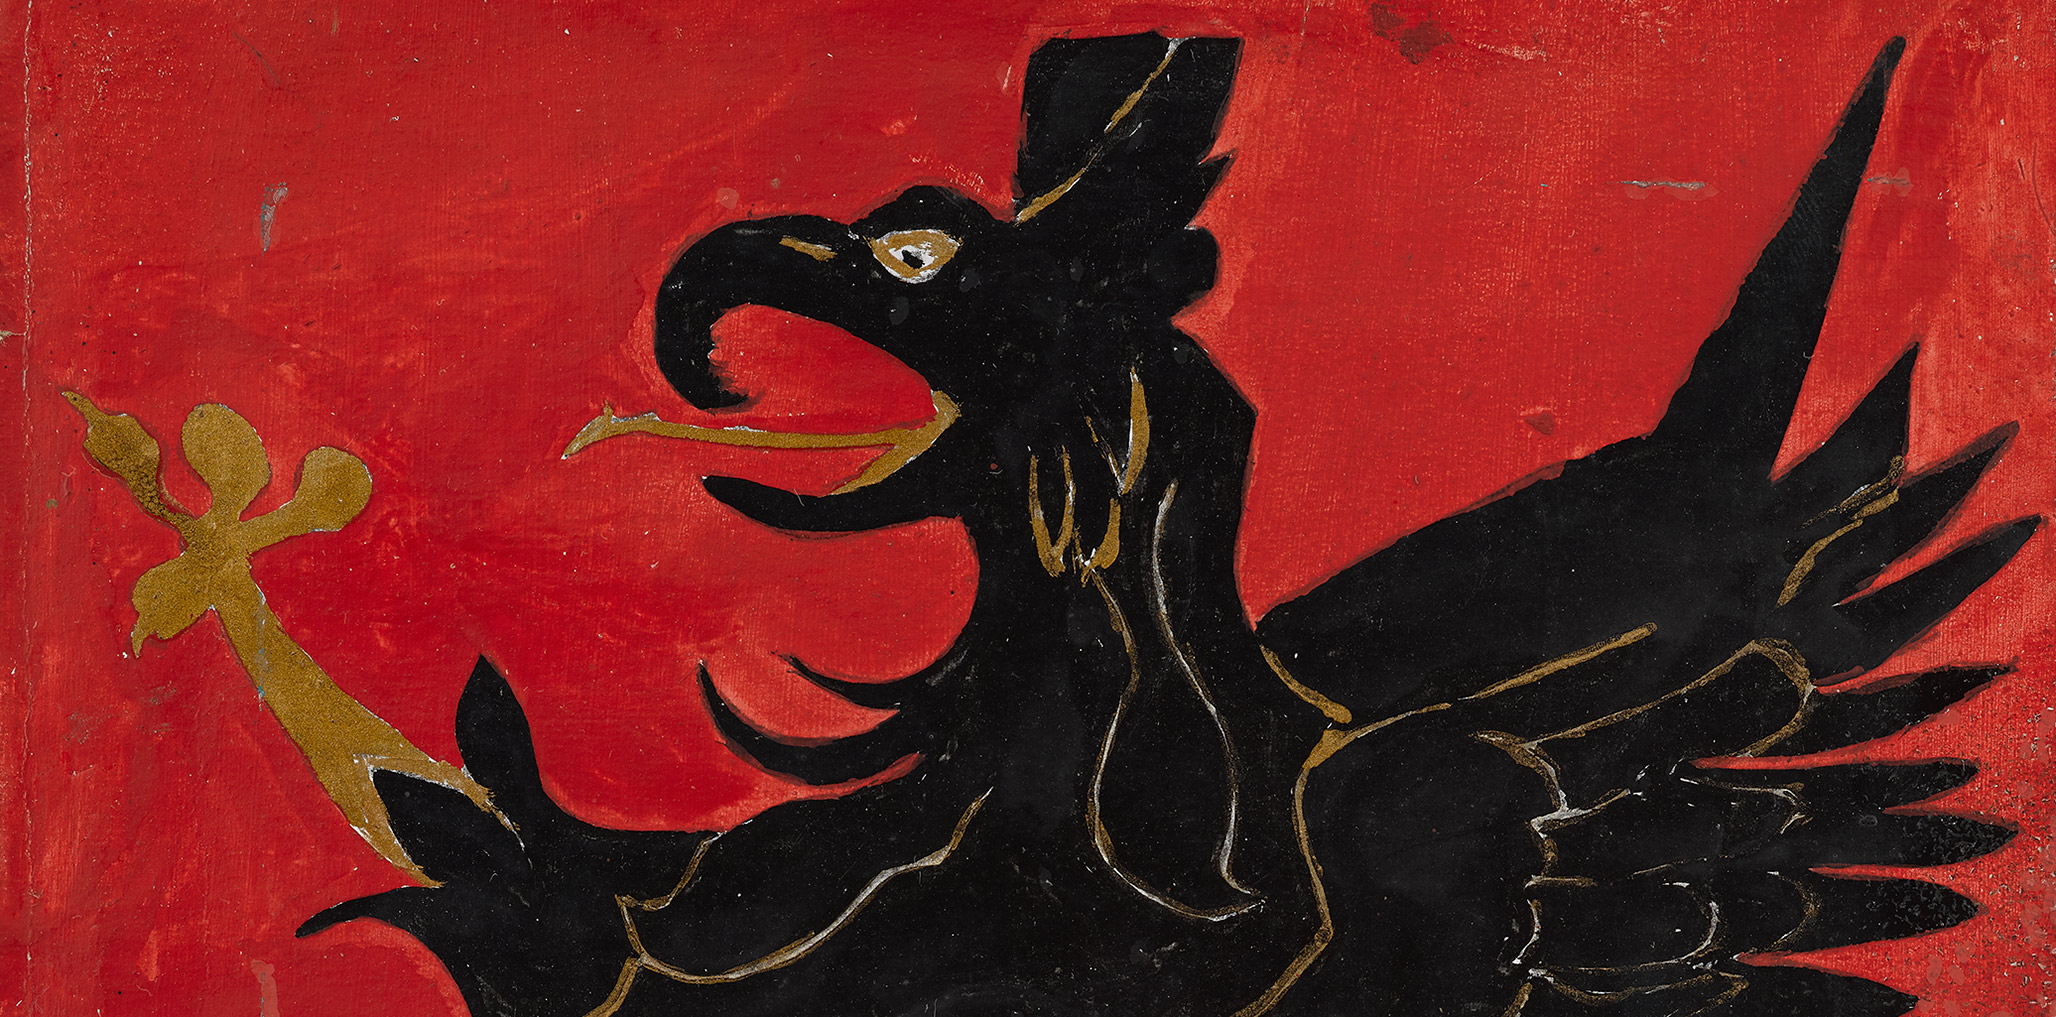 A detail from an undated work by Frank Walter, called Untitled (Heraldic Beast (Griffin)).